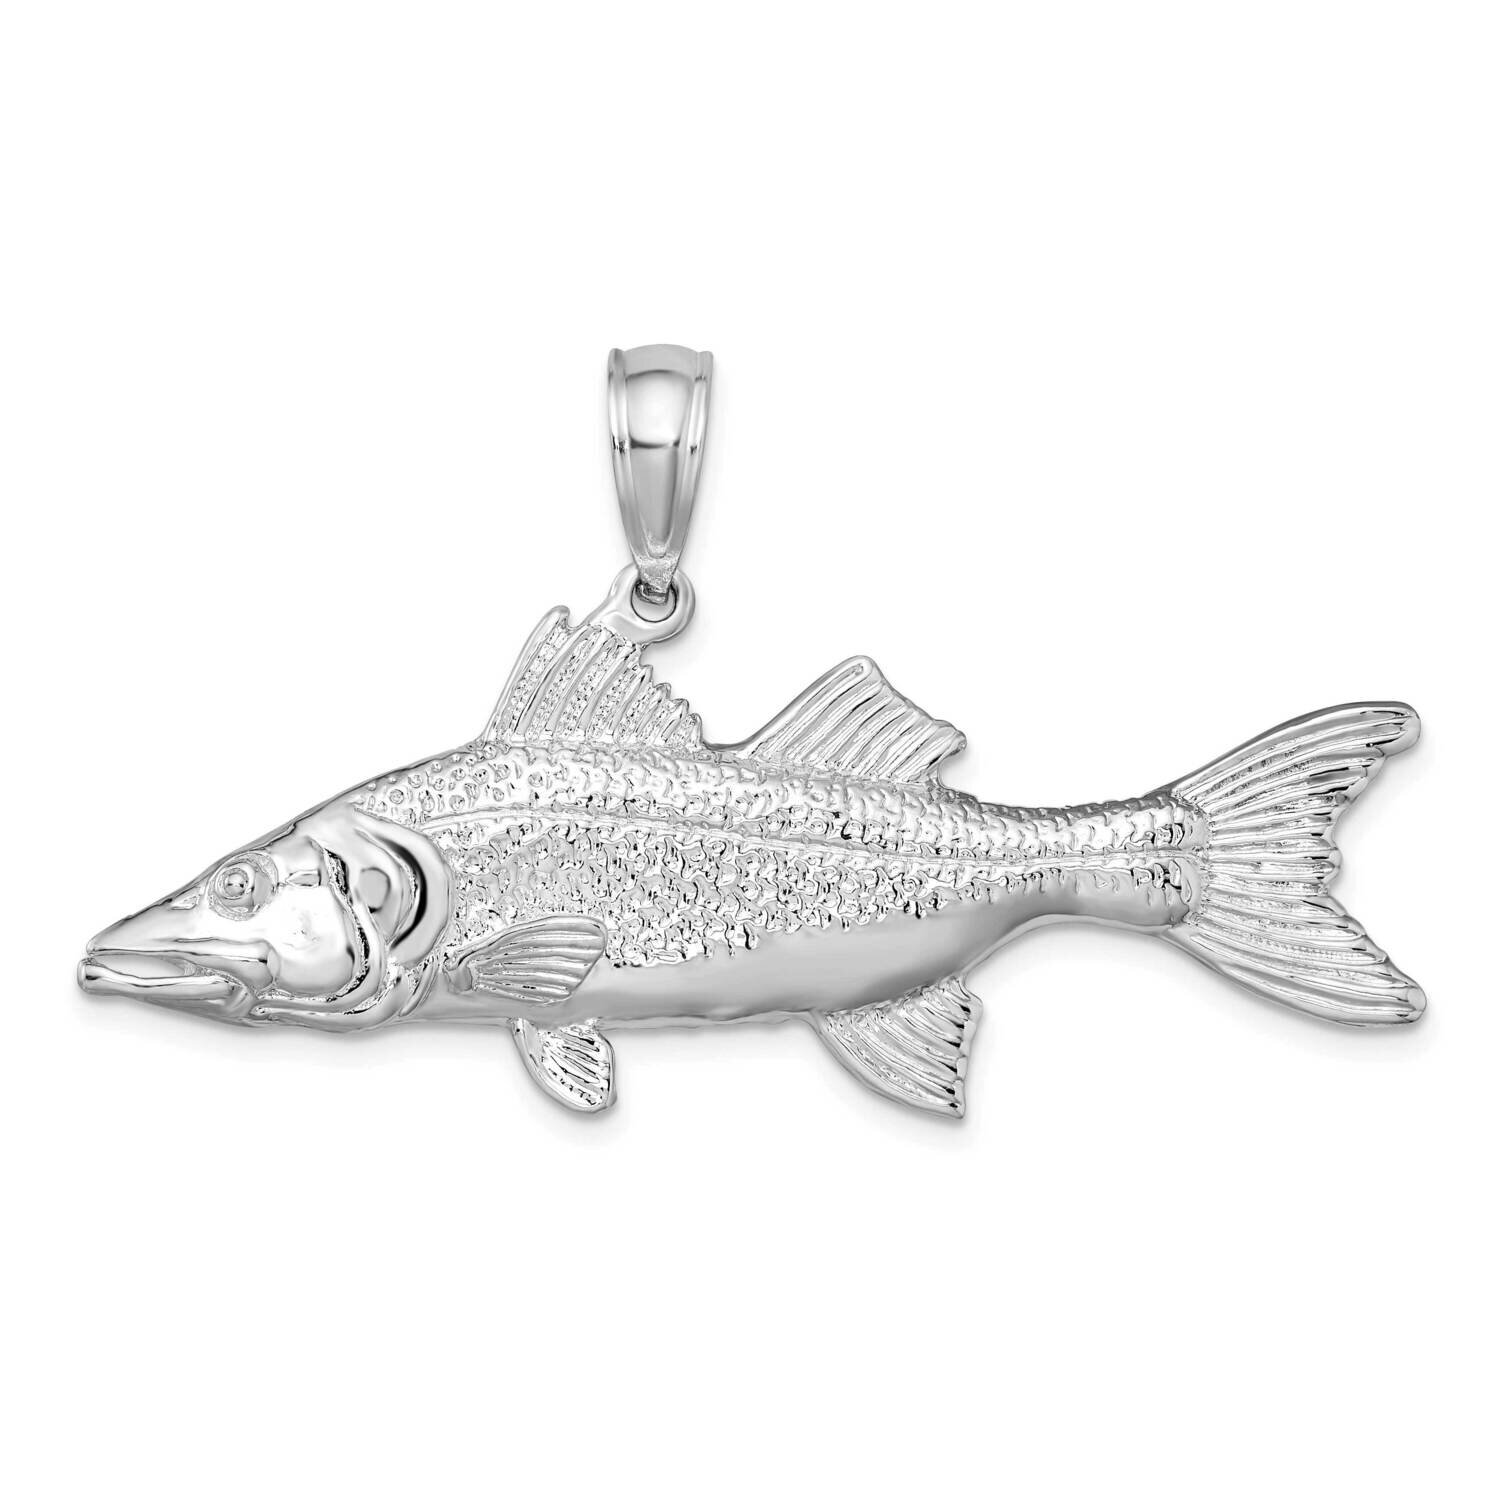 3D Snook Fish Pendant Sterling Silver Polished QC10176